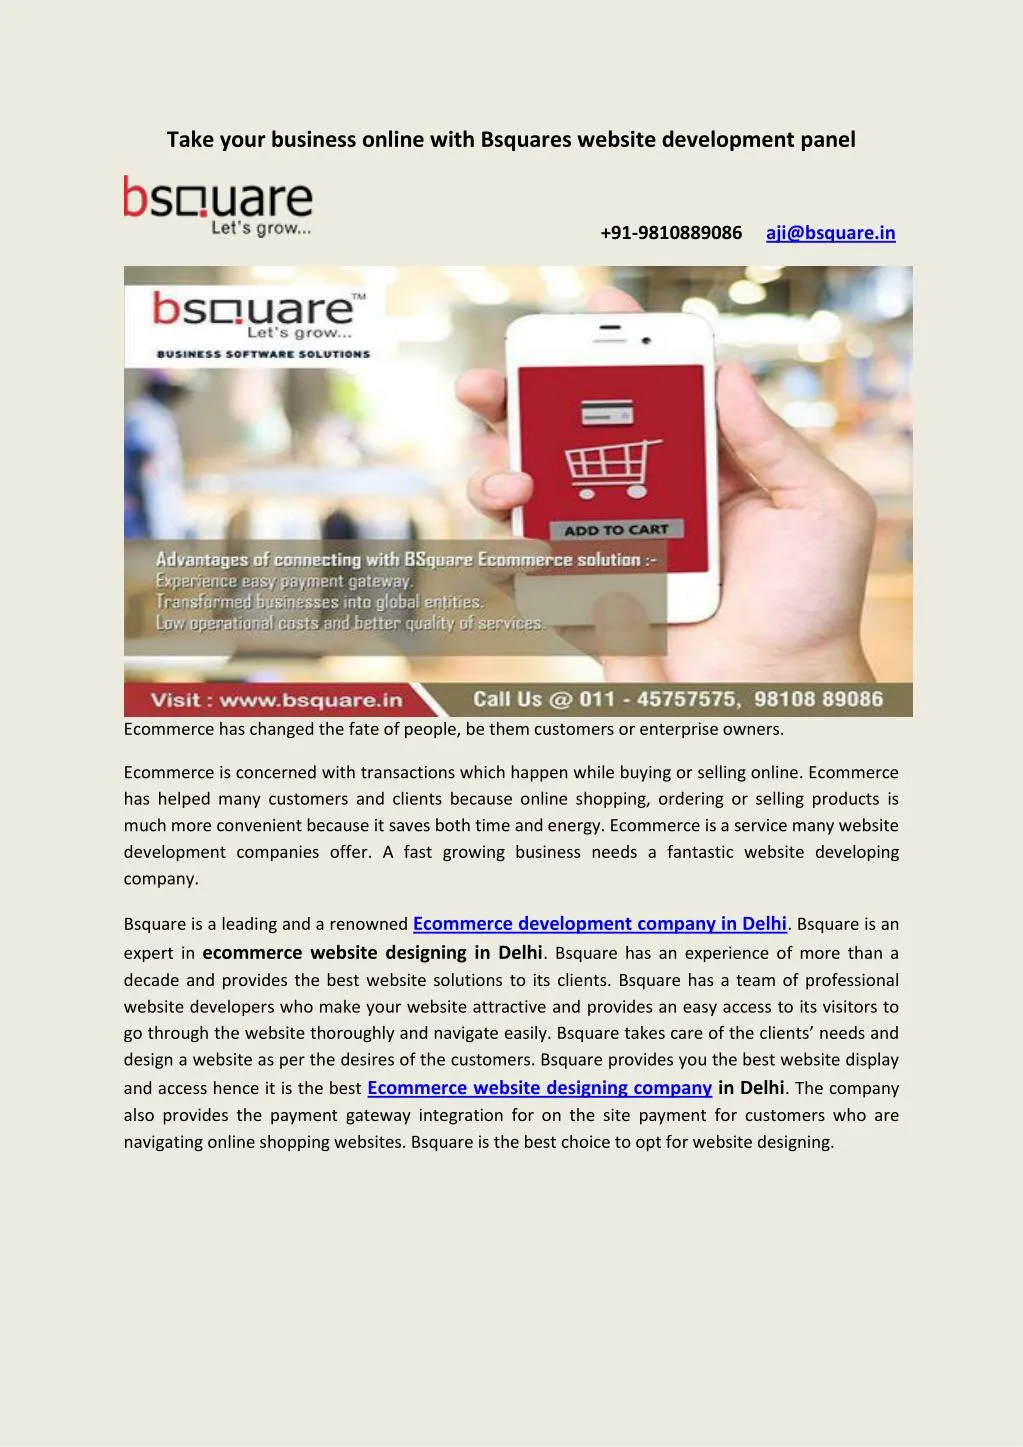 take your business online with bsquares website